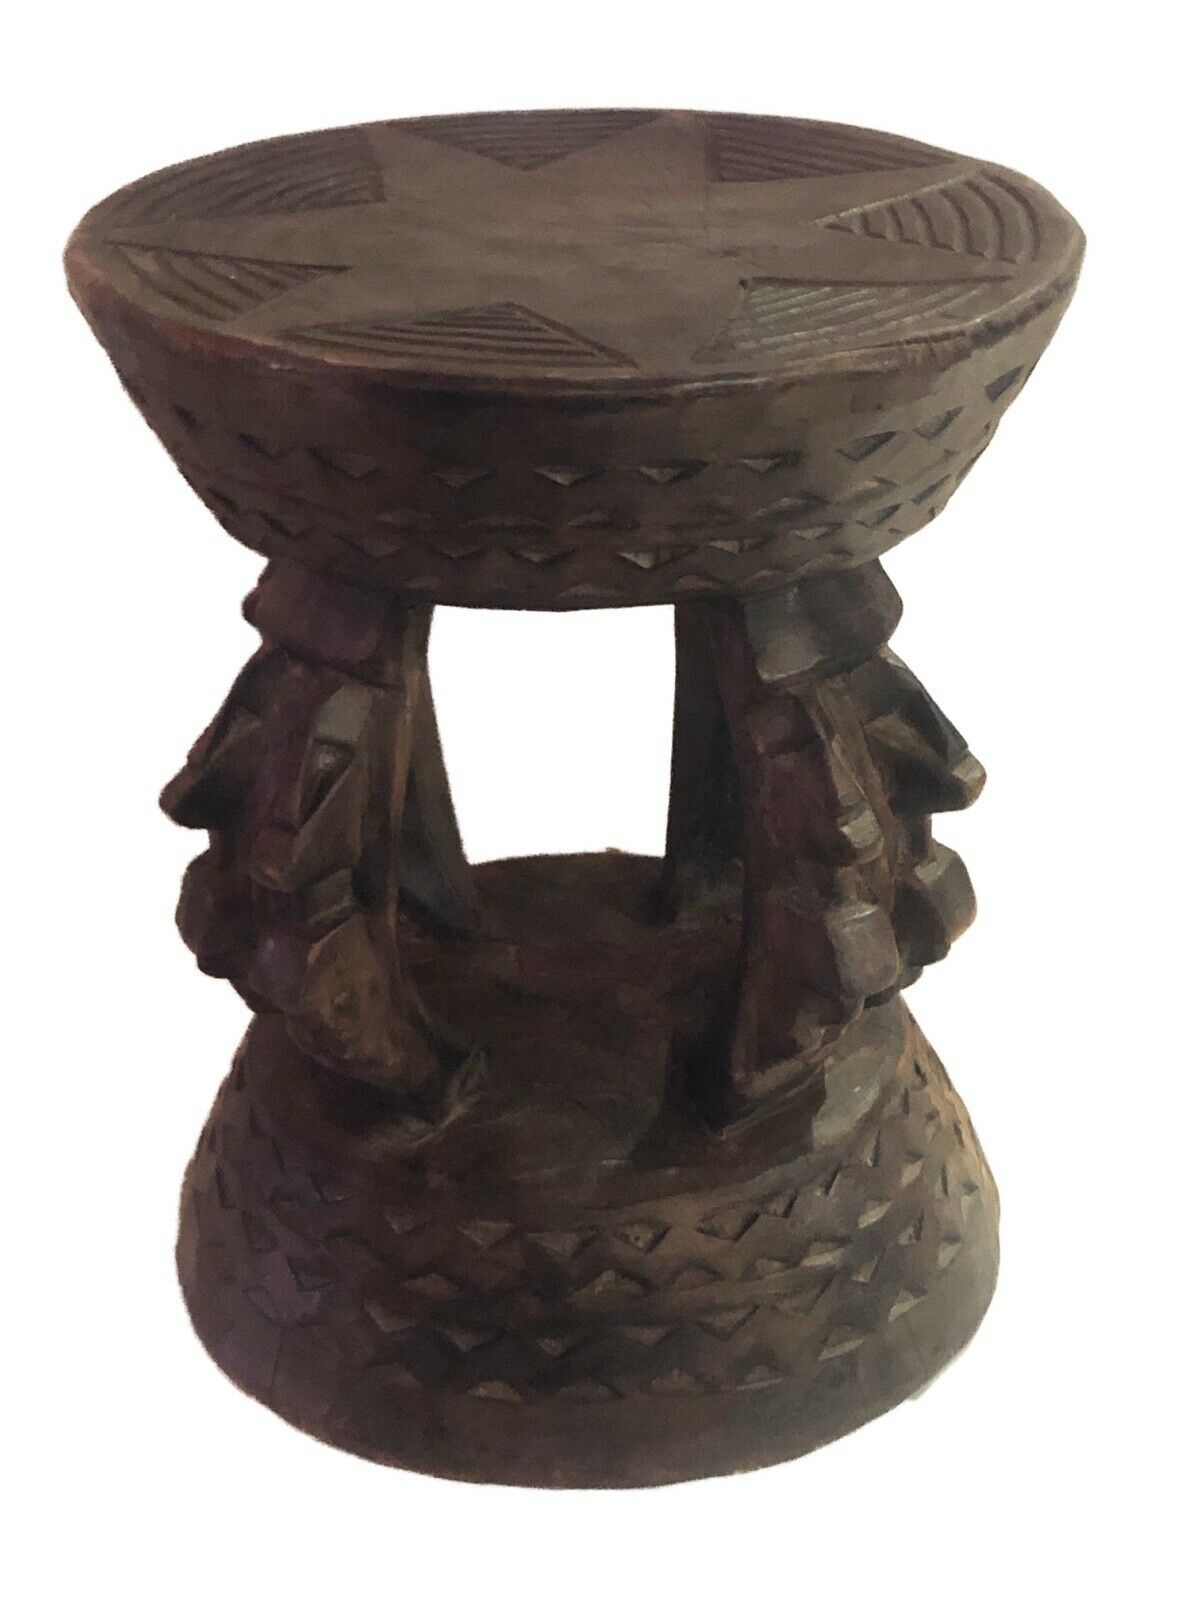 #650 African Dogon  Carved Wood Milk Stool Mali 11" H by 9" D